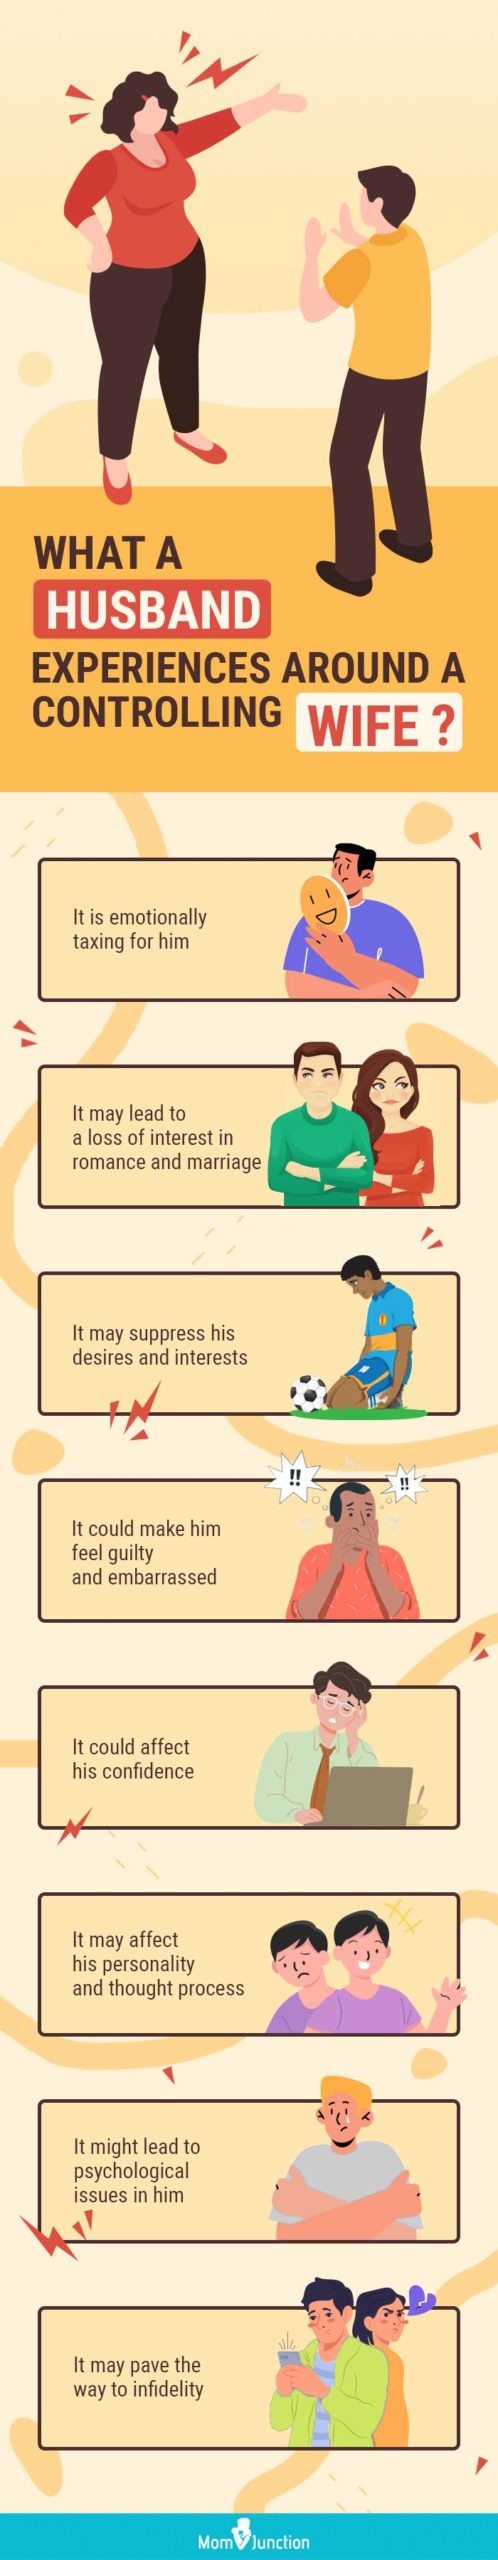 what a husband experiences around a controlling wife (infographic)